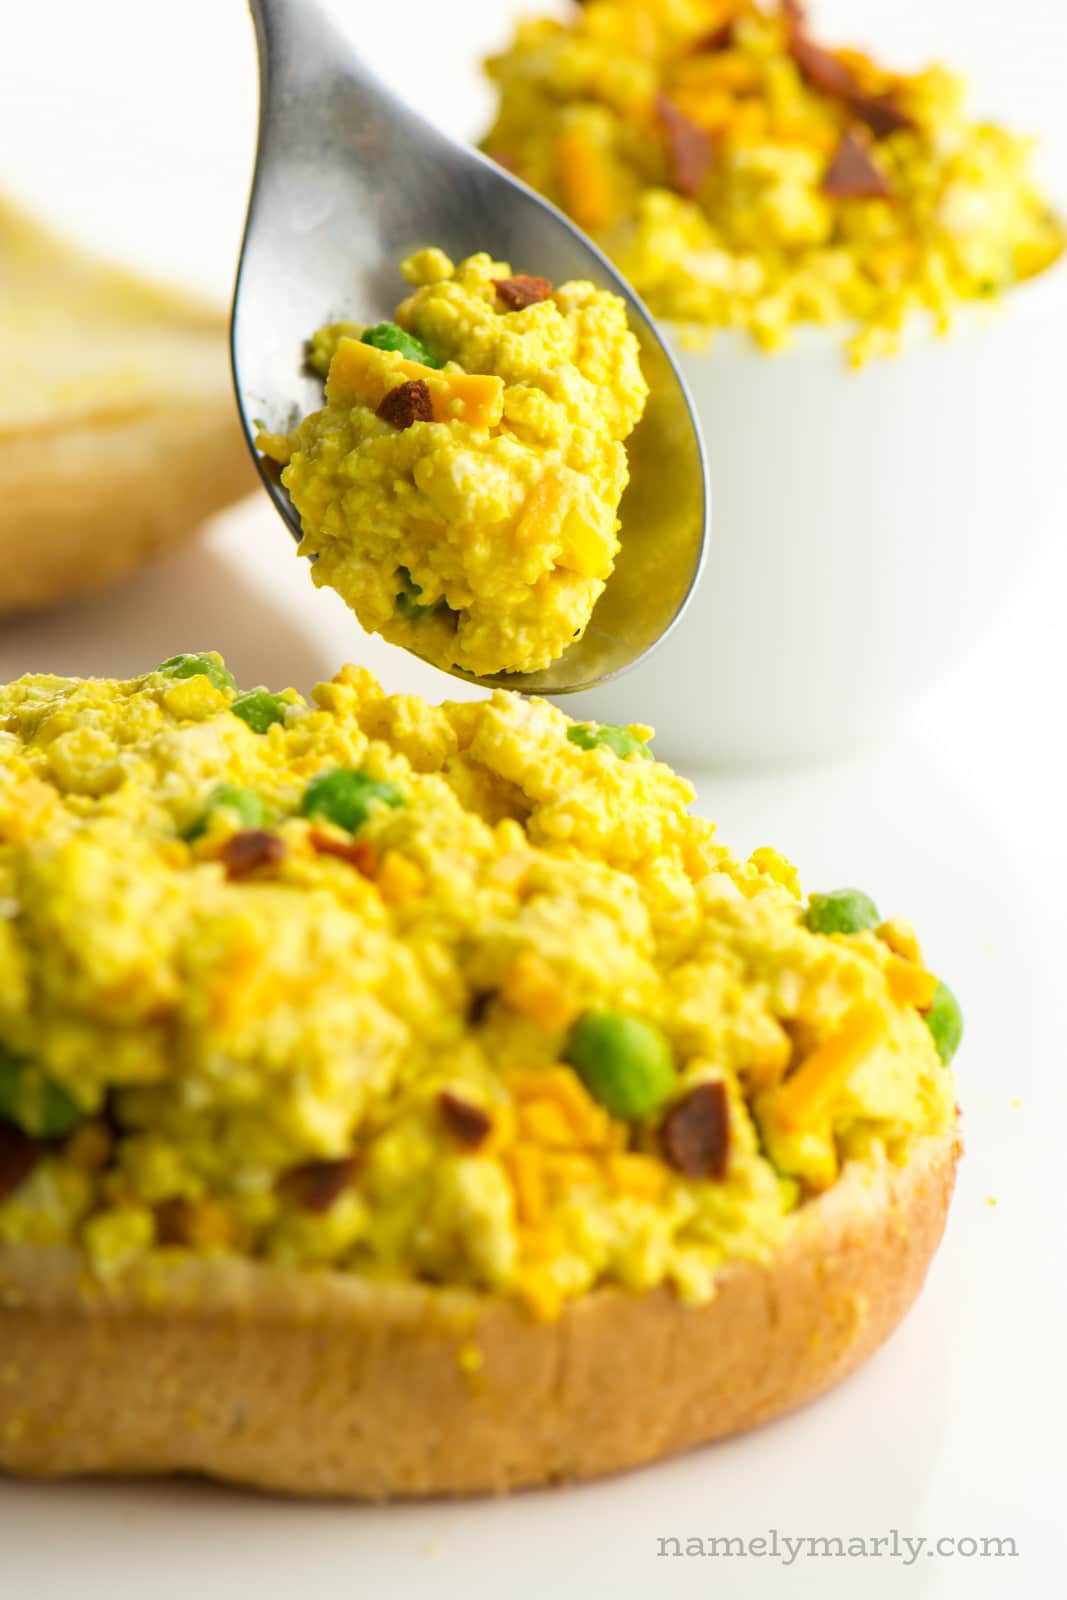 A spoon with vegan egg salad hovers over a sandwich loaded with the topping. A bowl with more of the ingredients is behind it.